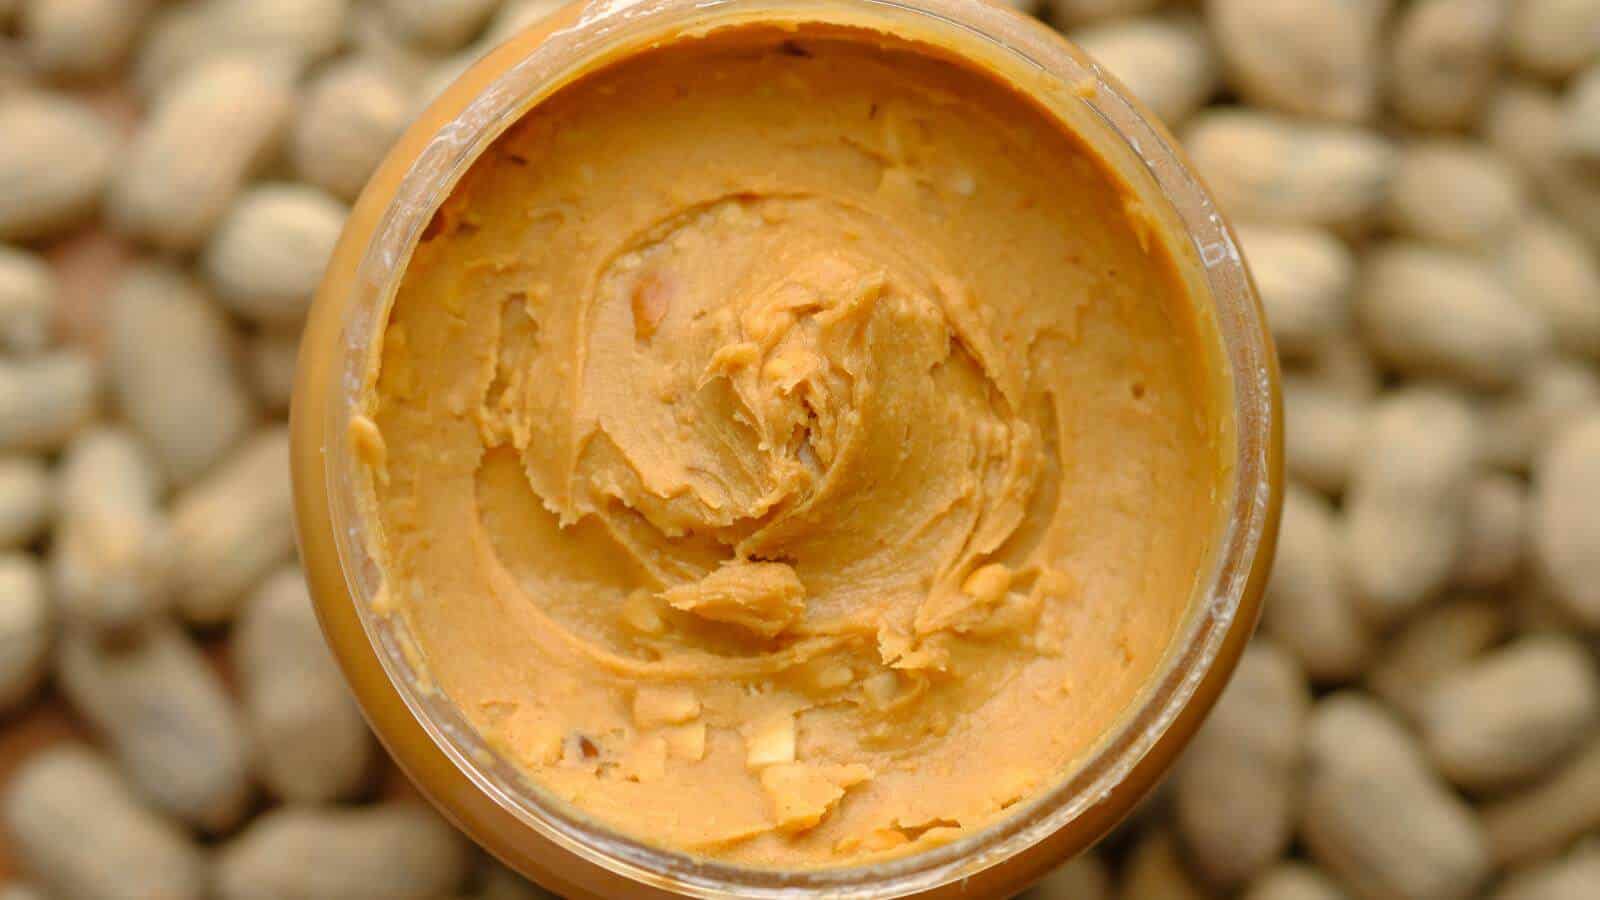 A close up view of the inside of a jar of peanut butter.